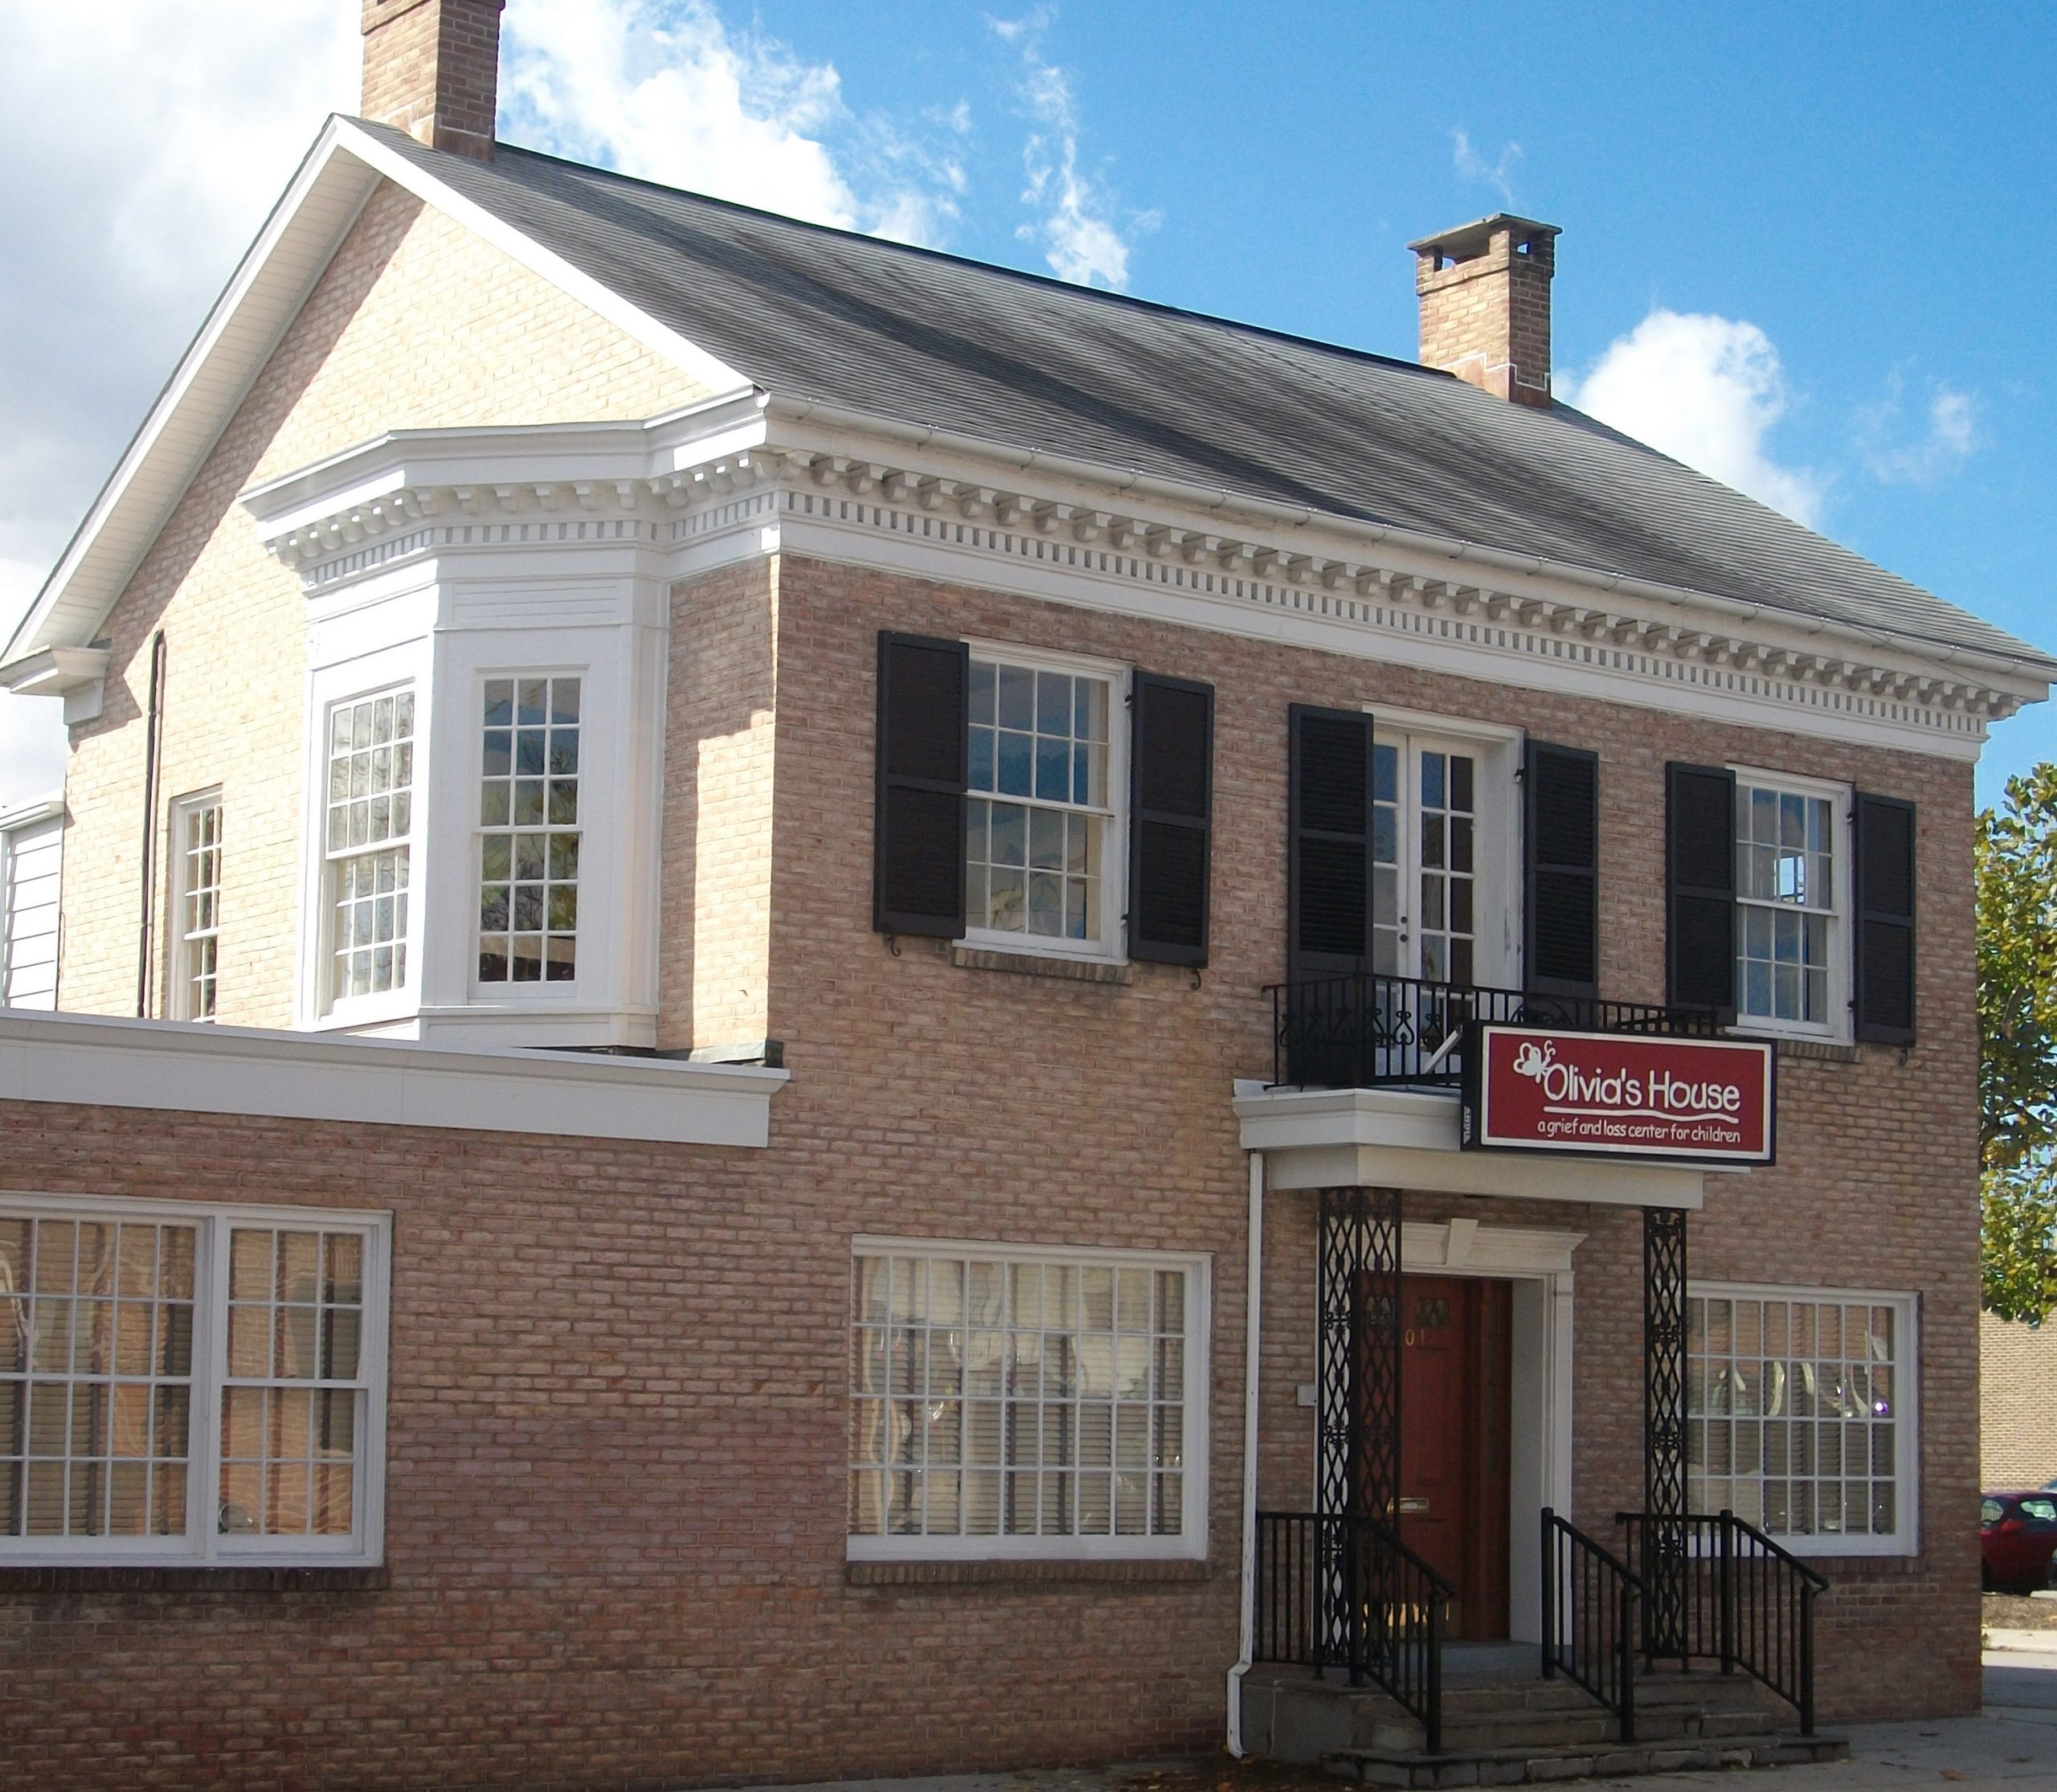 Formerly the Bell Insurance building, 101 Baltimore Street now serves as the home of Olivia’s House Hanover. The fifteen-room facility serves to meet children’s grief and loss needs in the greater Hanover community.